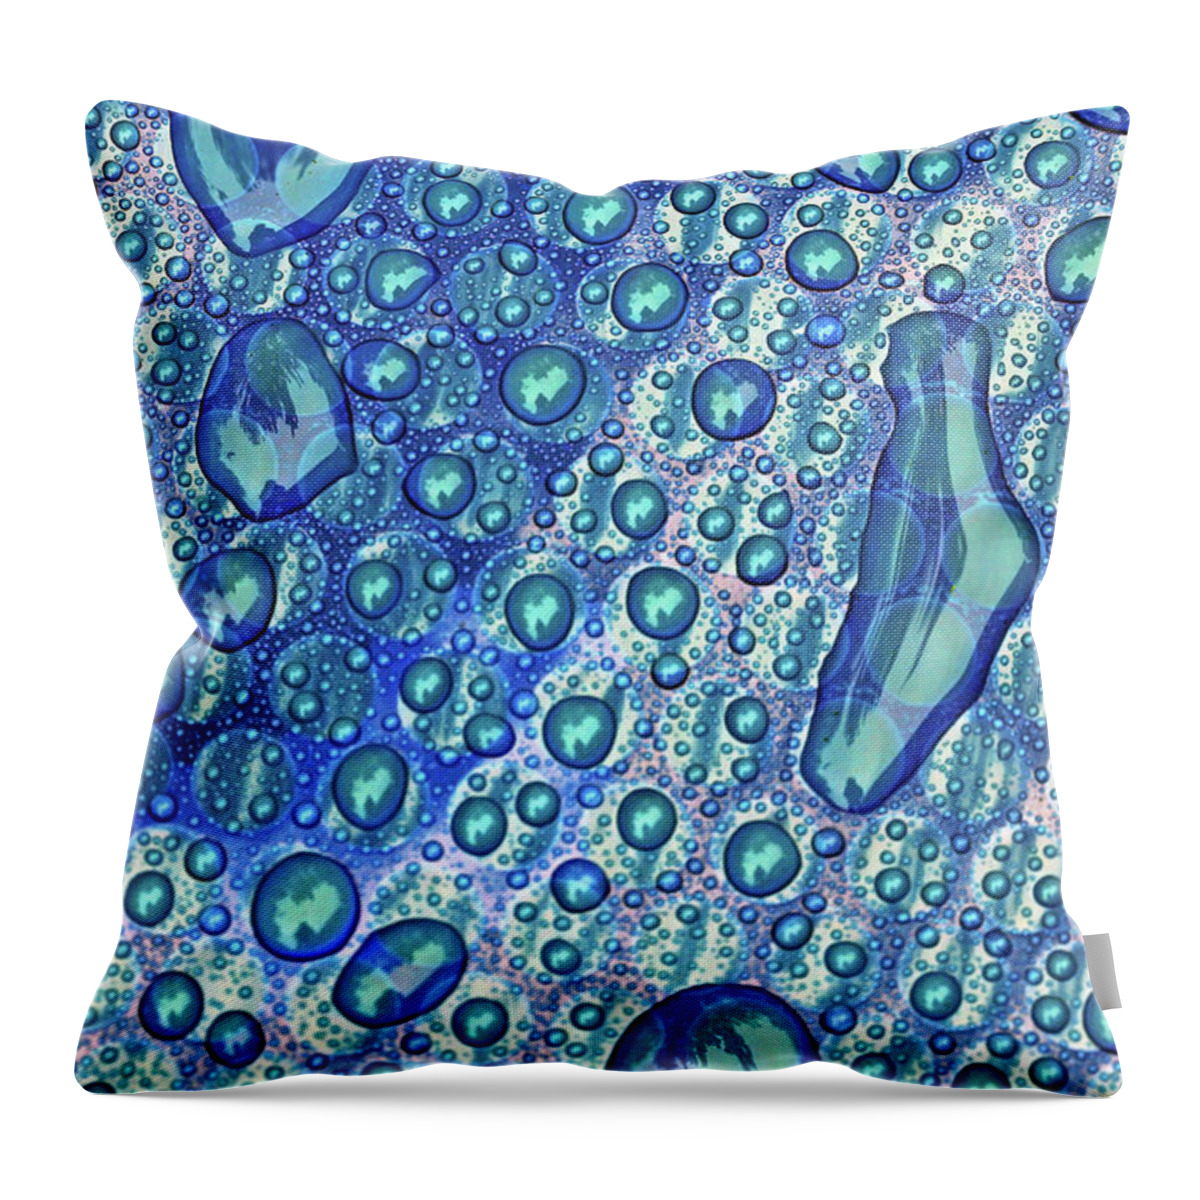 Bubbles Throw Pillow featuring the photograph Bubbles In All Sizes by Debbie Oppermann